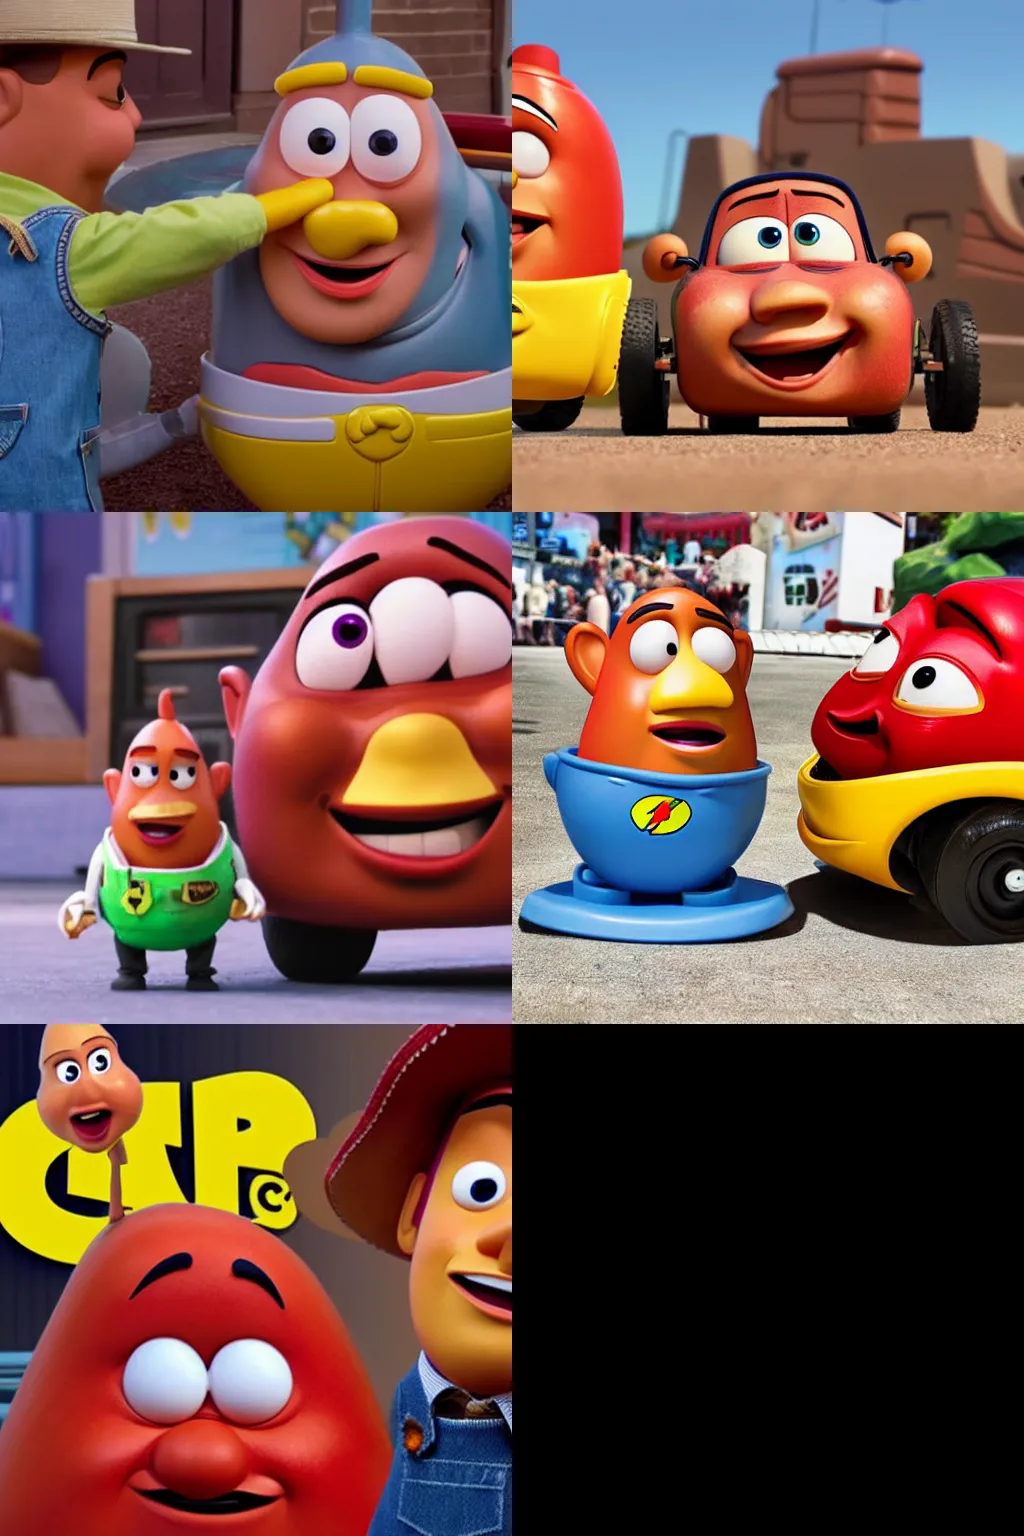 mister potato head from the toy story 4 movie in 2019